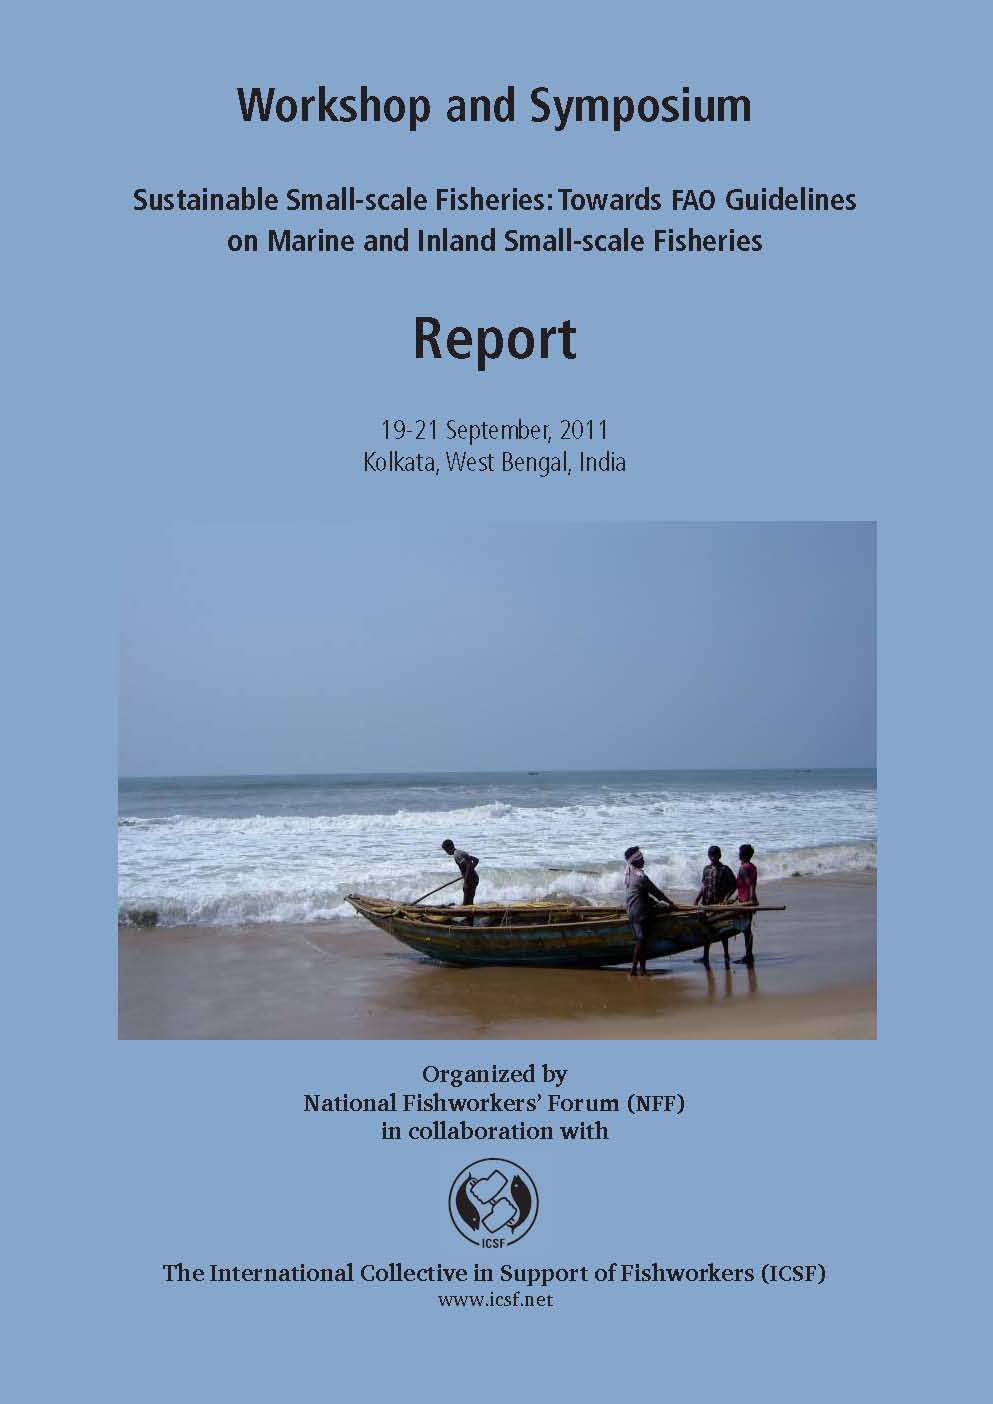 Report of the Workshop and symposium on Sustainable Small-Scale Fisheries: Towards FAO Guidelines on Marine and Inland Small-Scale Fisheries,   19-21 September 2011, Kolkata, West Bengal, India